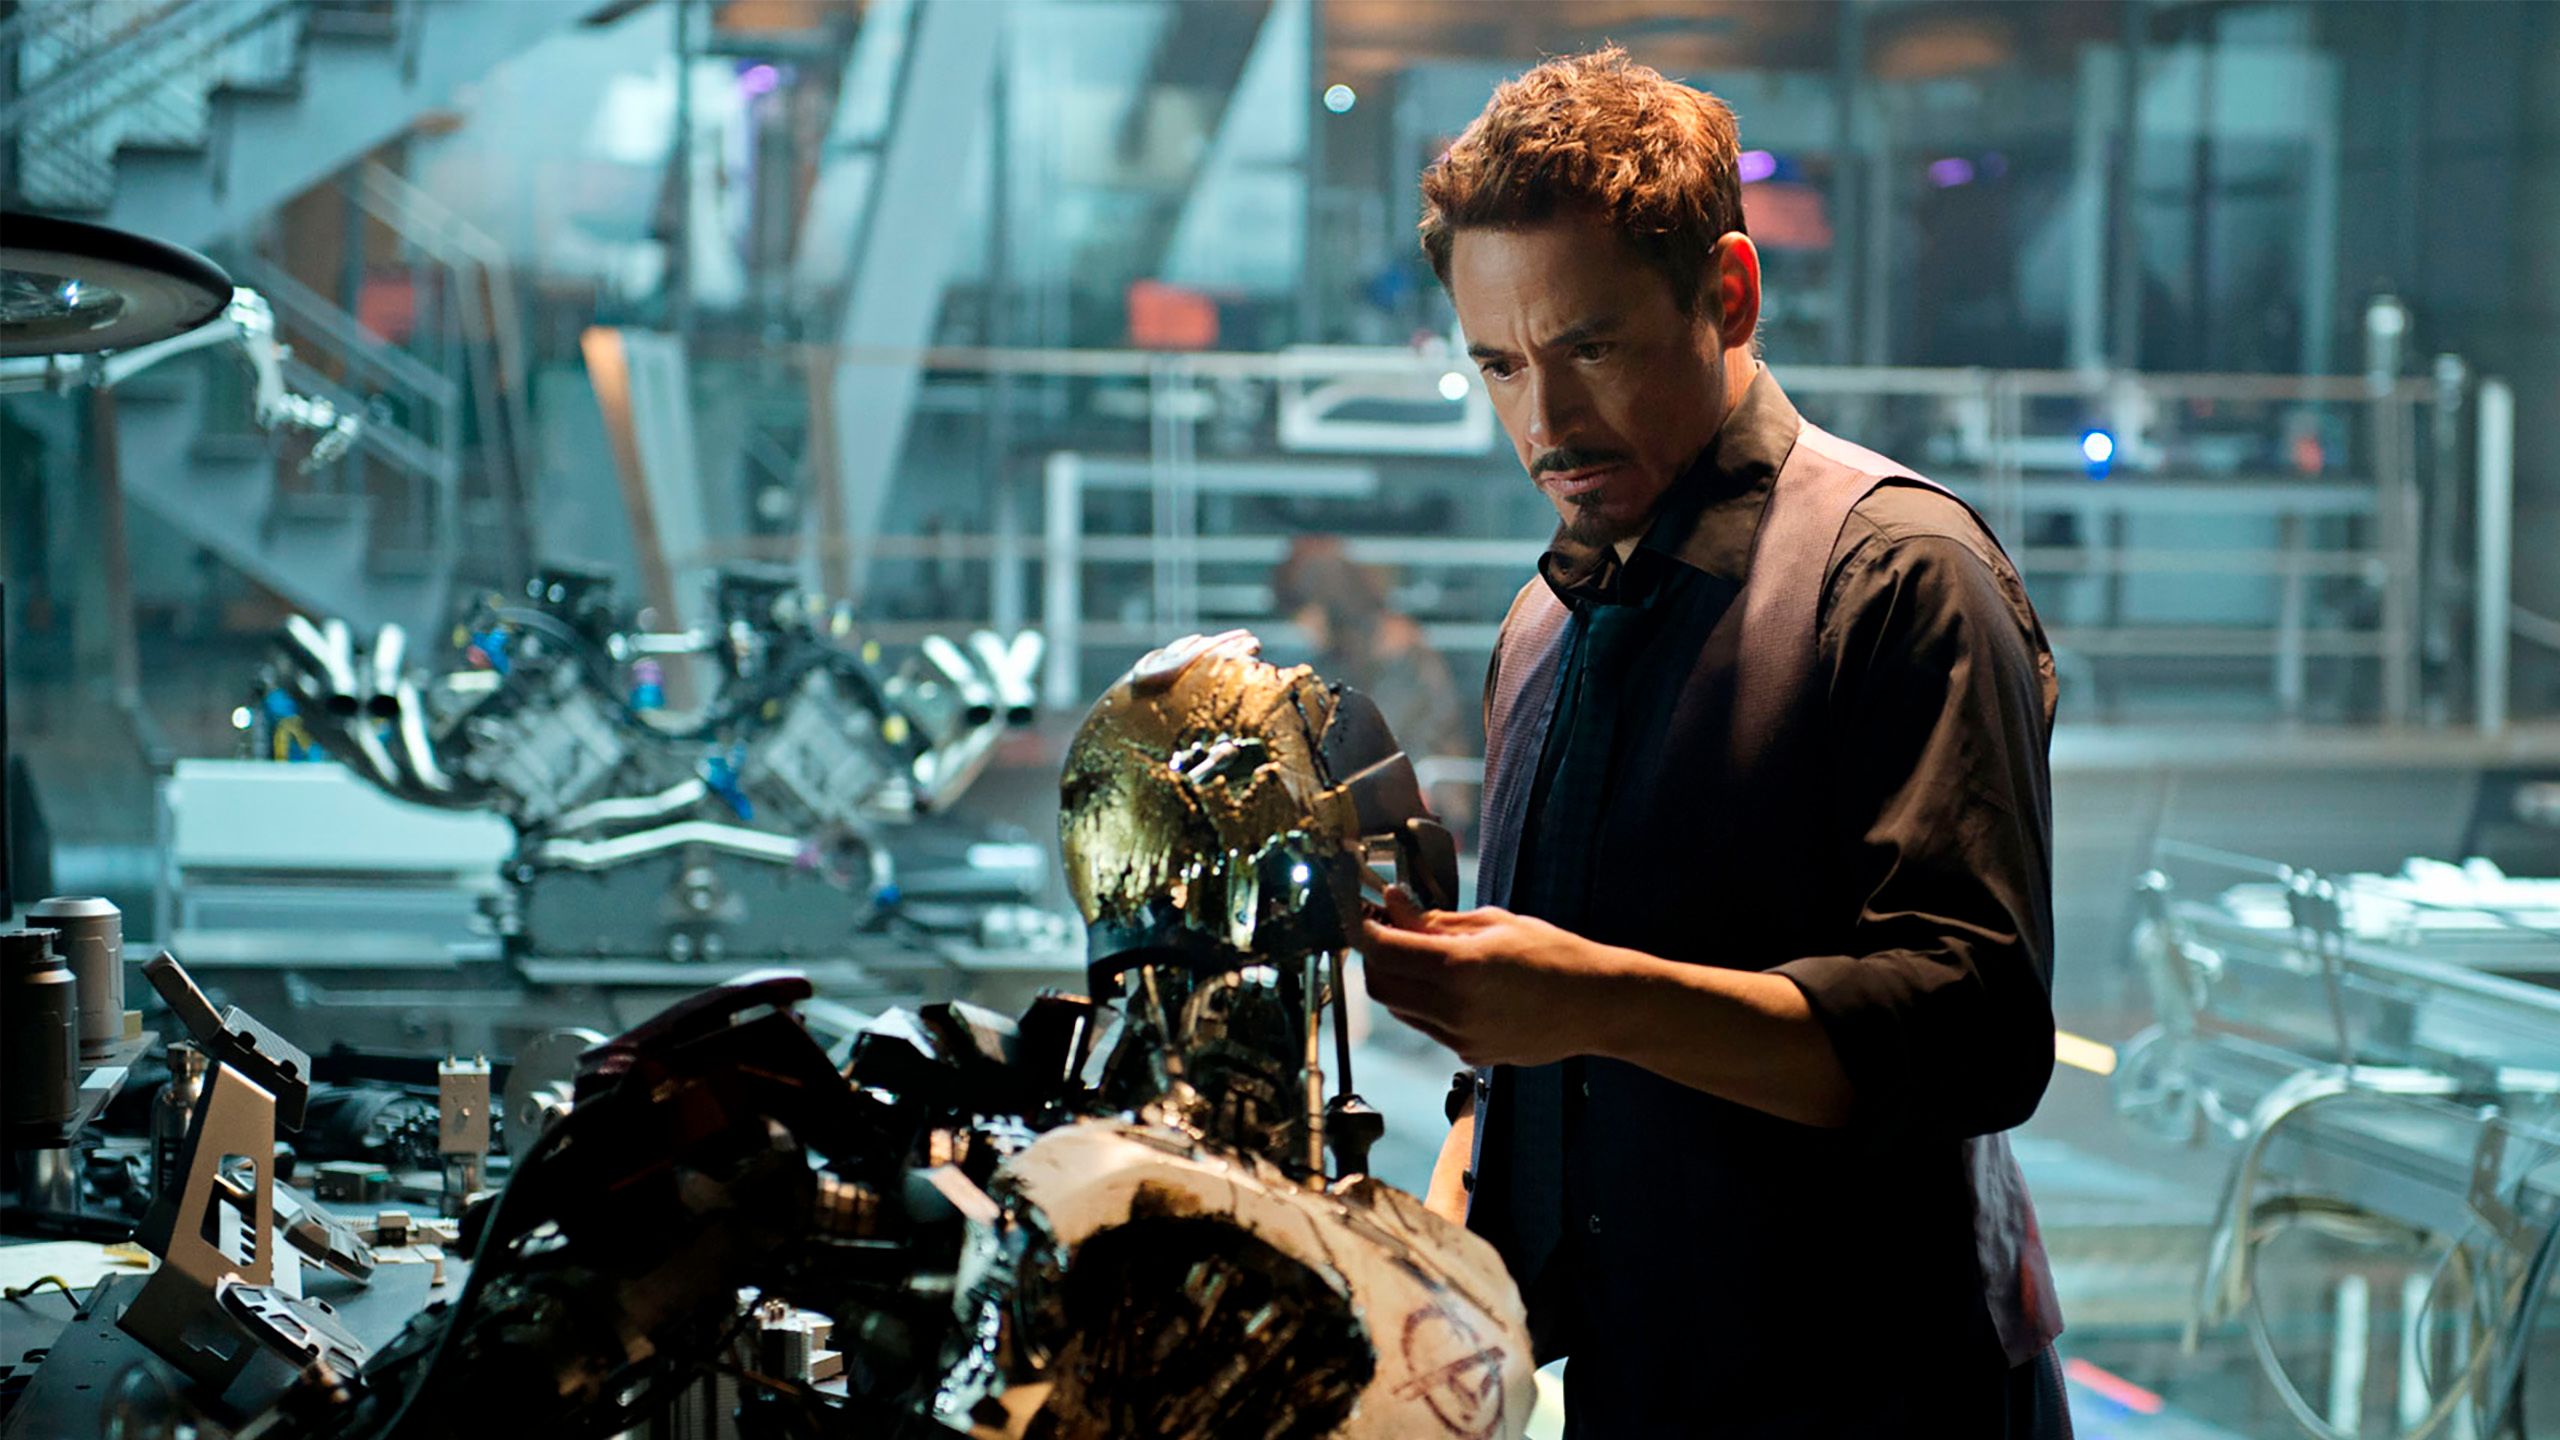 avengers age of ultron free torrent download